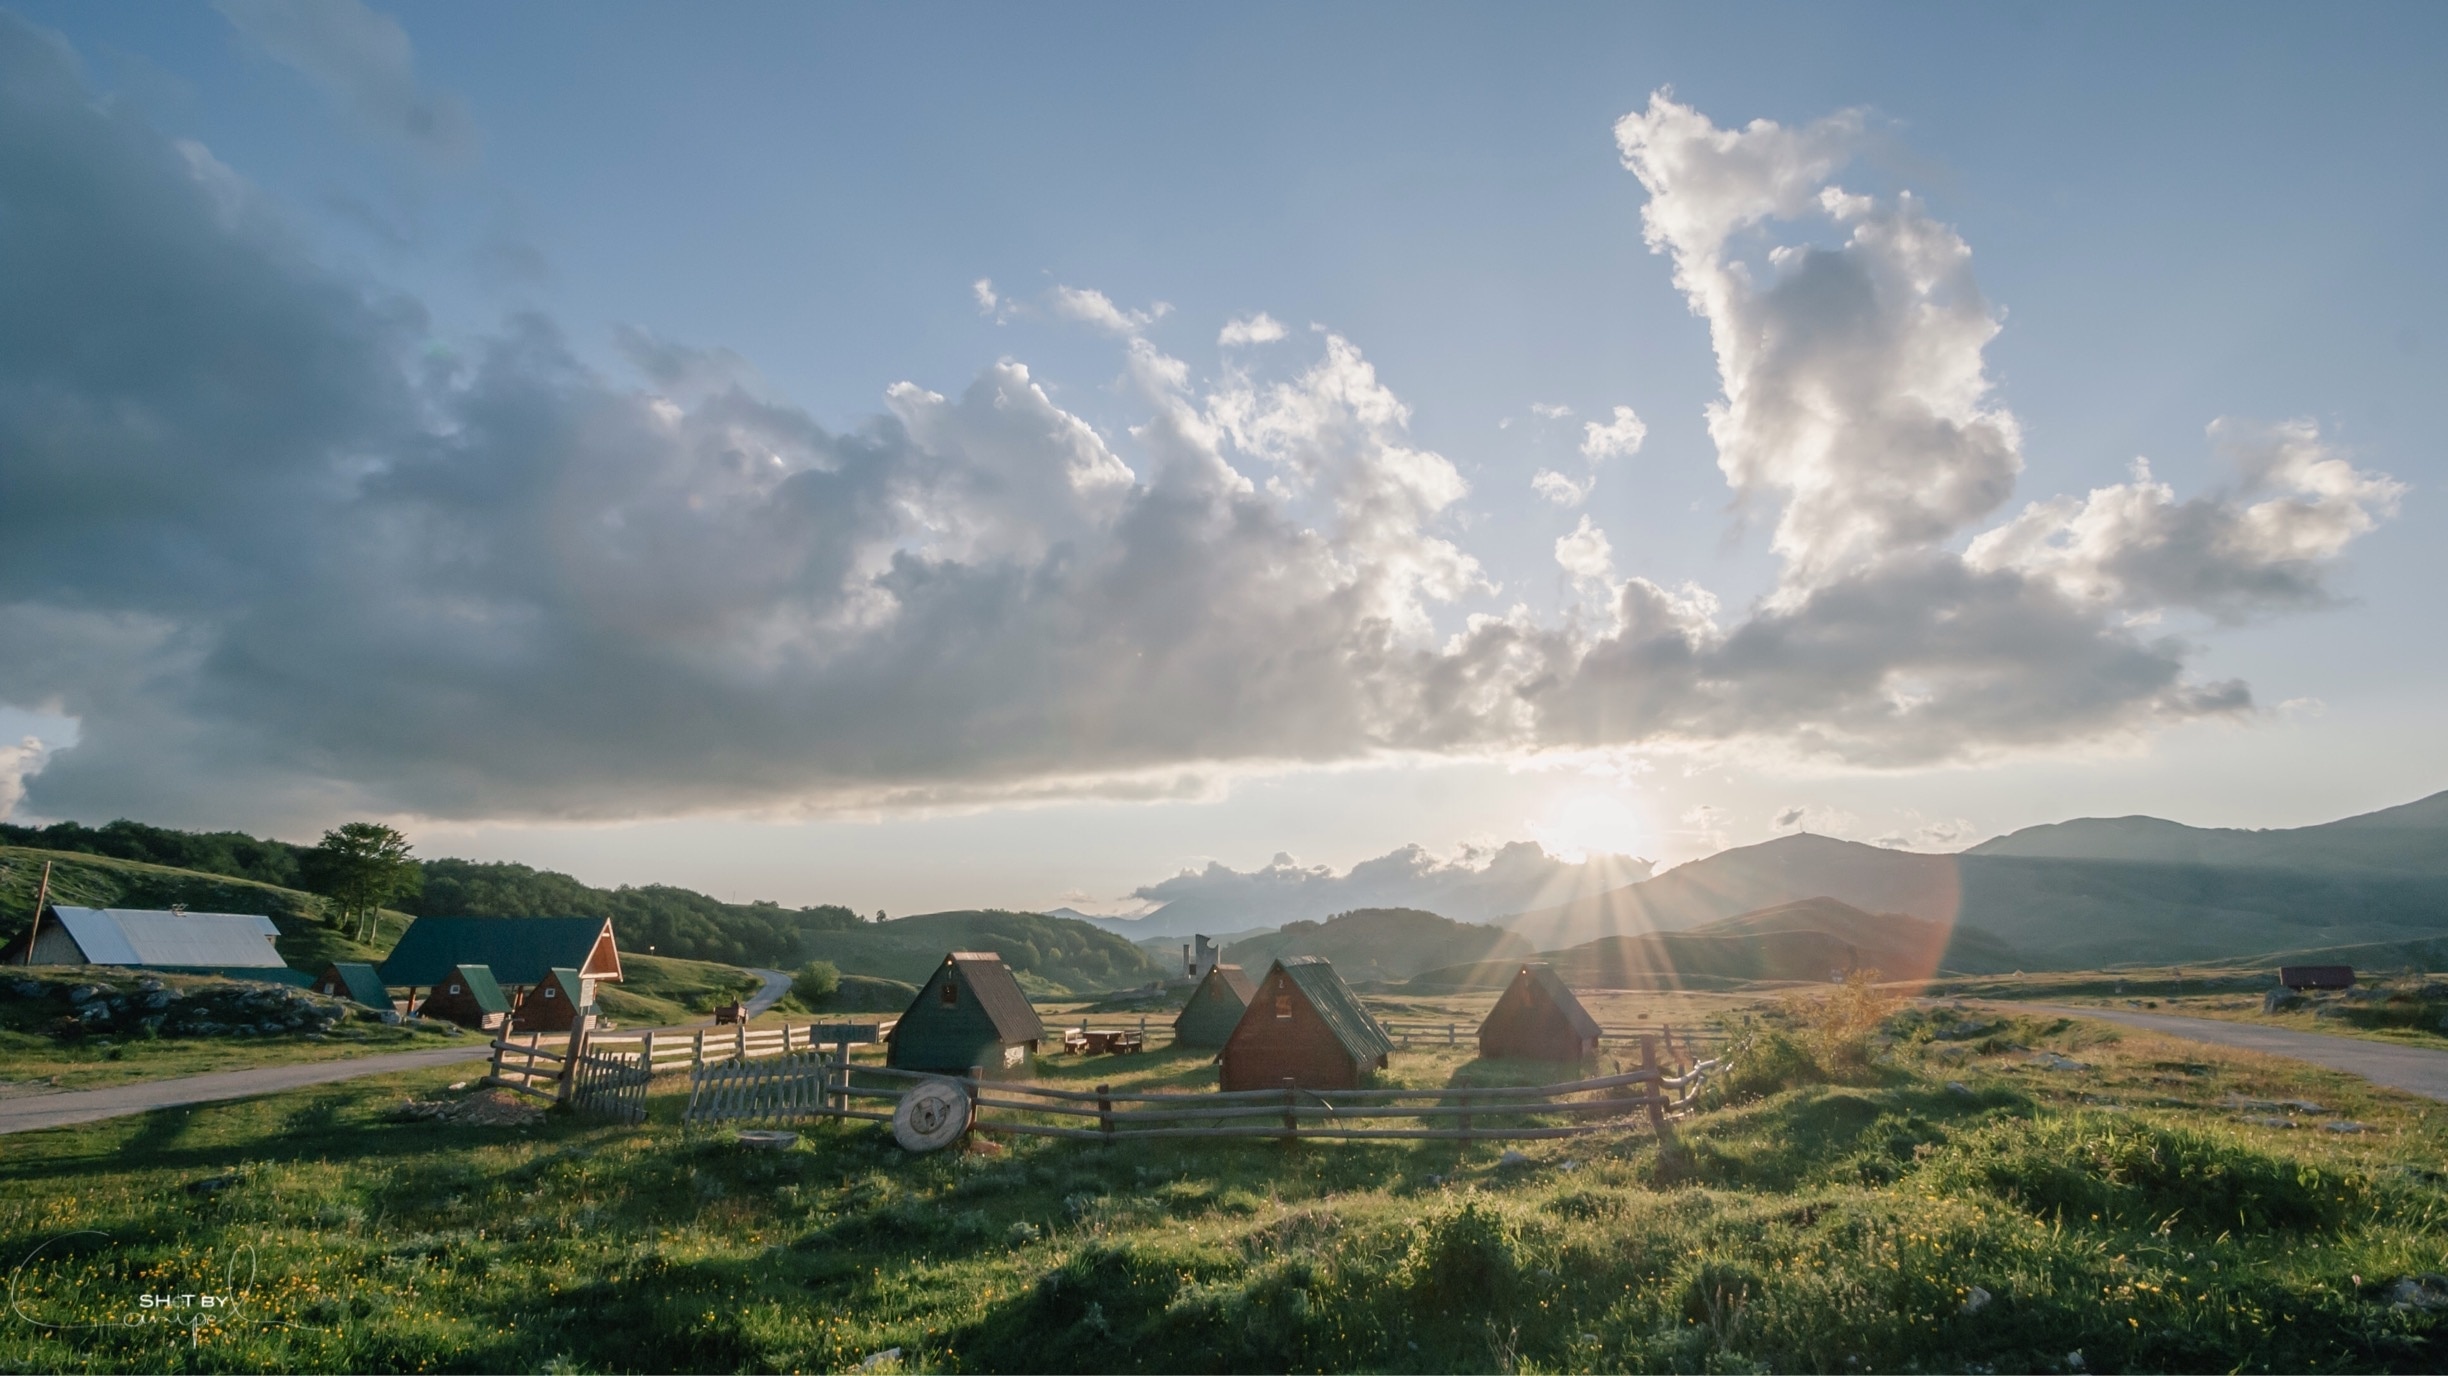 Charming campsite in the middle of the Durmitor National Park. Very peaceful and relaxing. Just enjoy nature at its best! Love this place! #trover #montenegro #durmitor #roadtrip #nationalpark